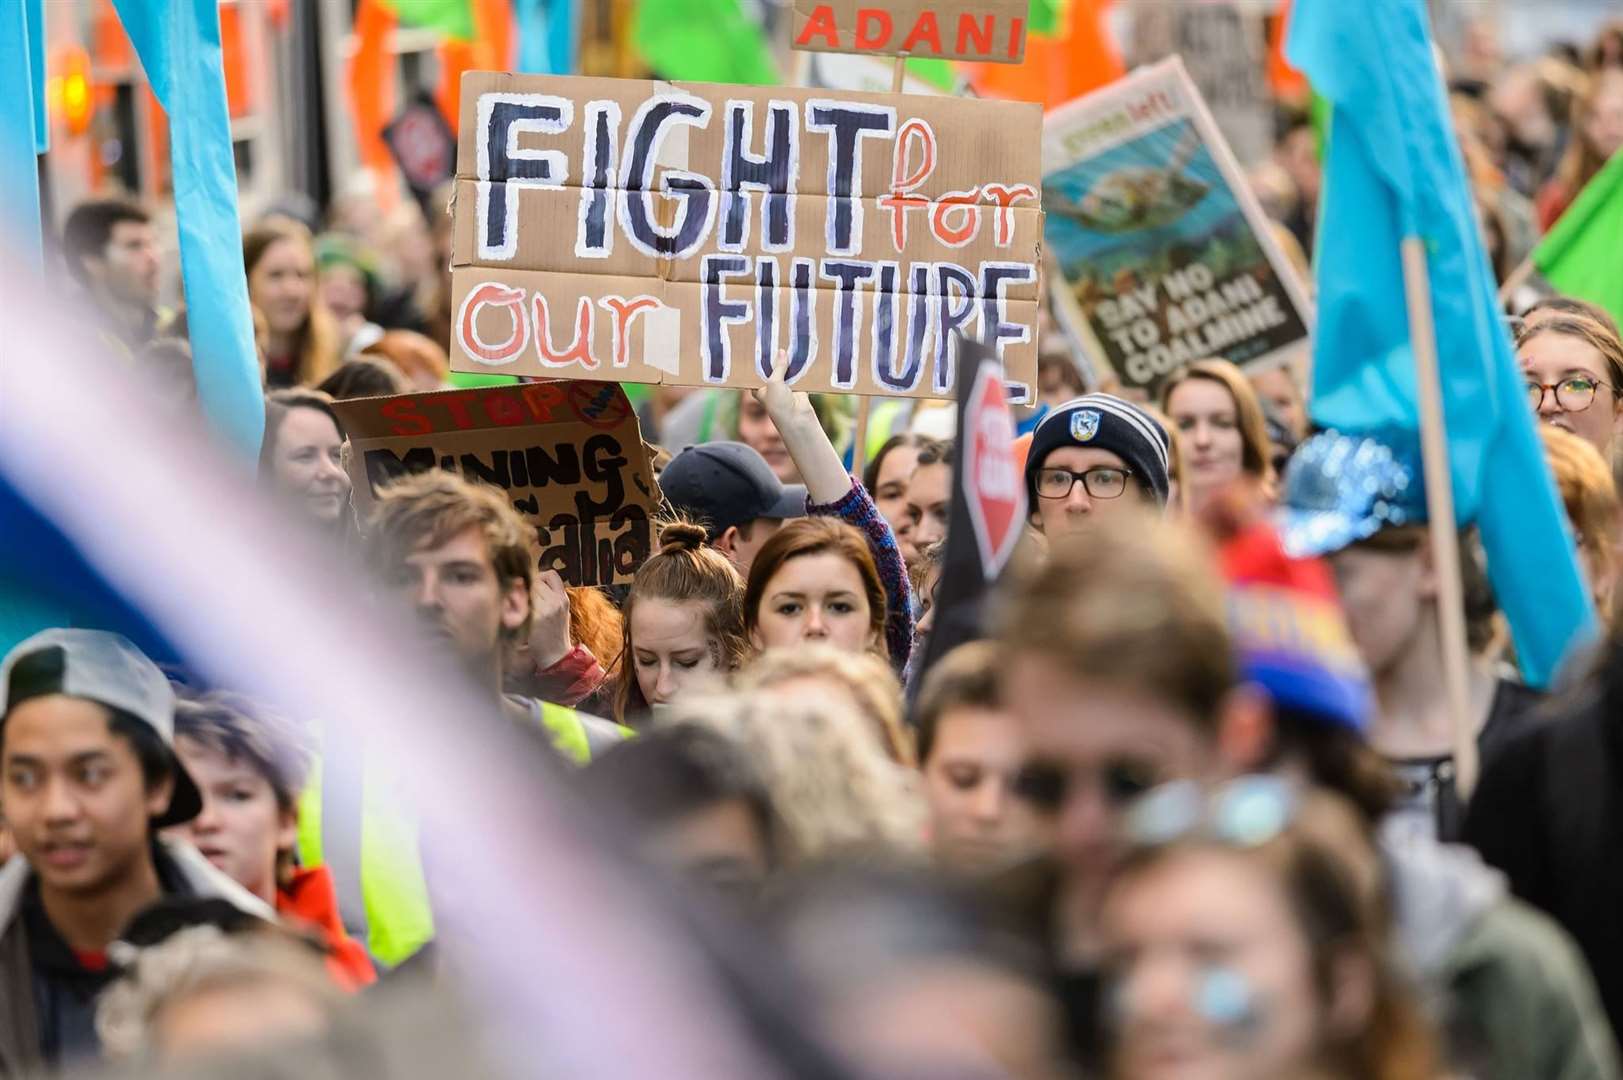 Maidstone was the first to declare a climate emergency